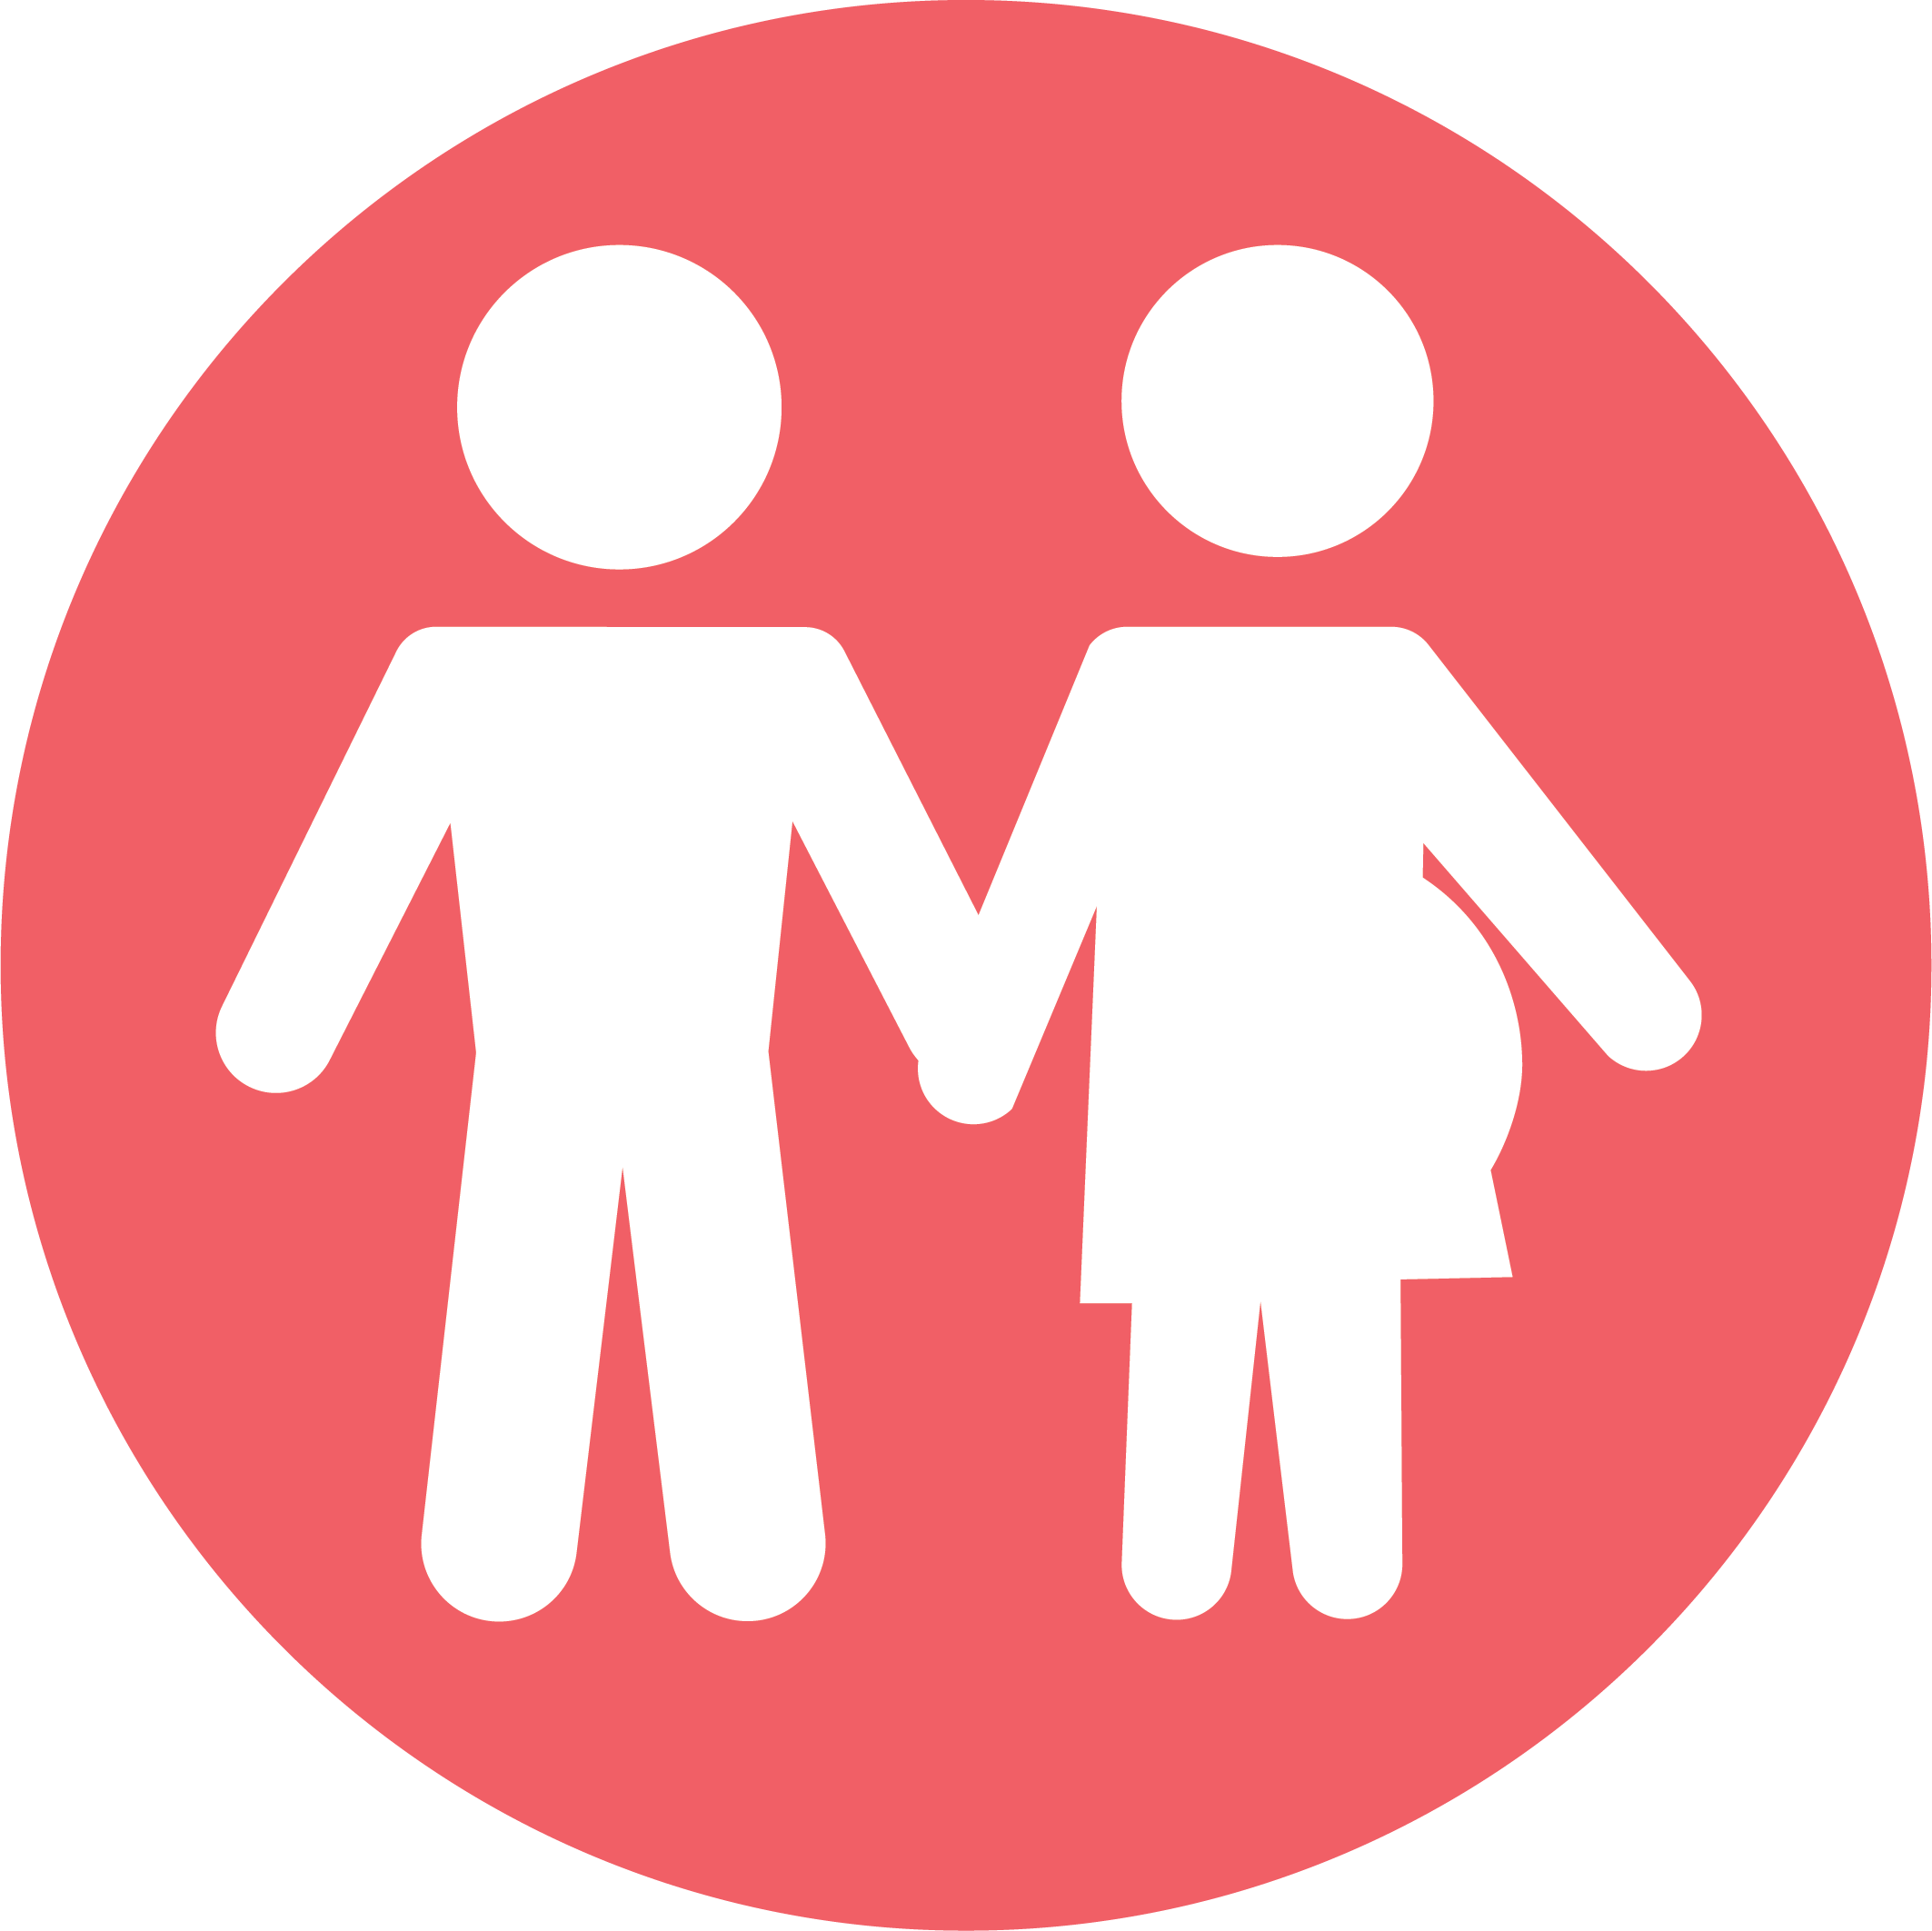 pregnant woman with partner or support person